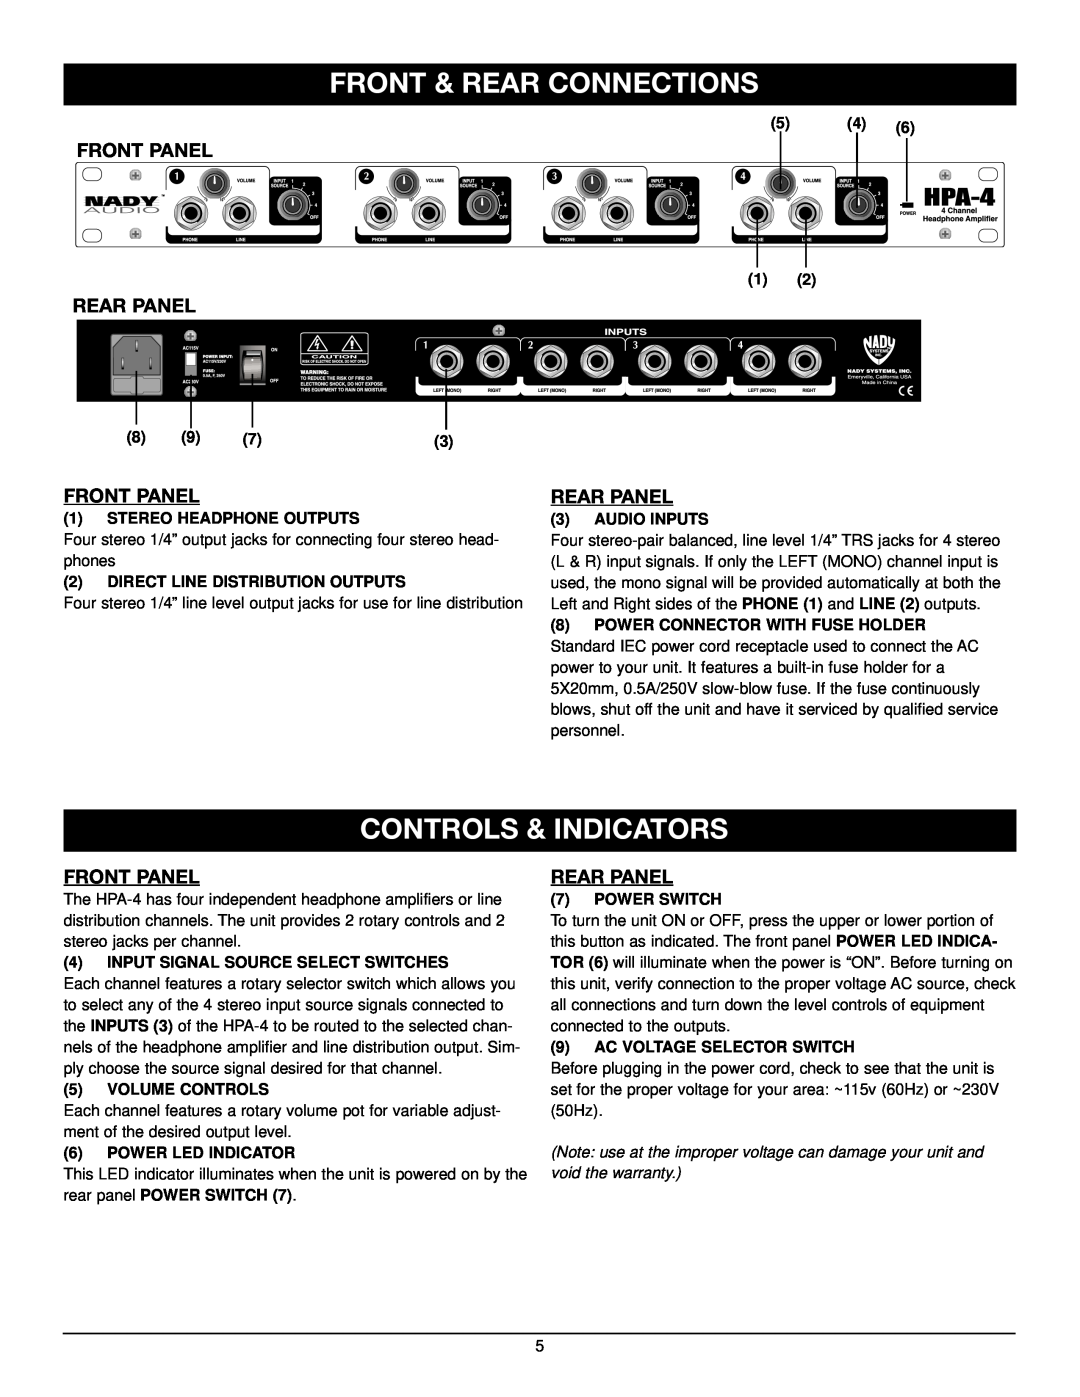 Nady Systems HPA-4 manual Front & Rear Connections, Controls & Indicators, Front Panel, Rear Panel 